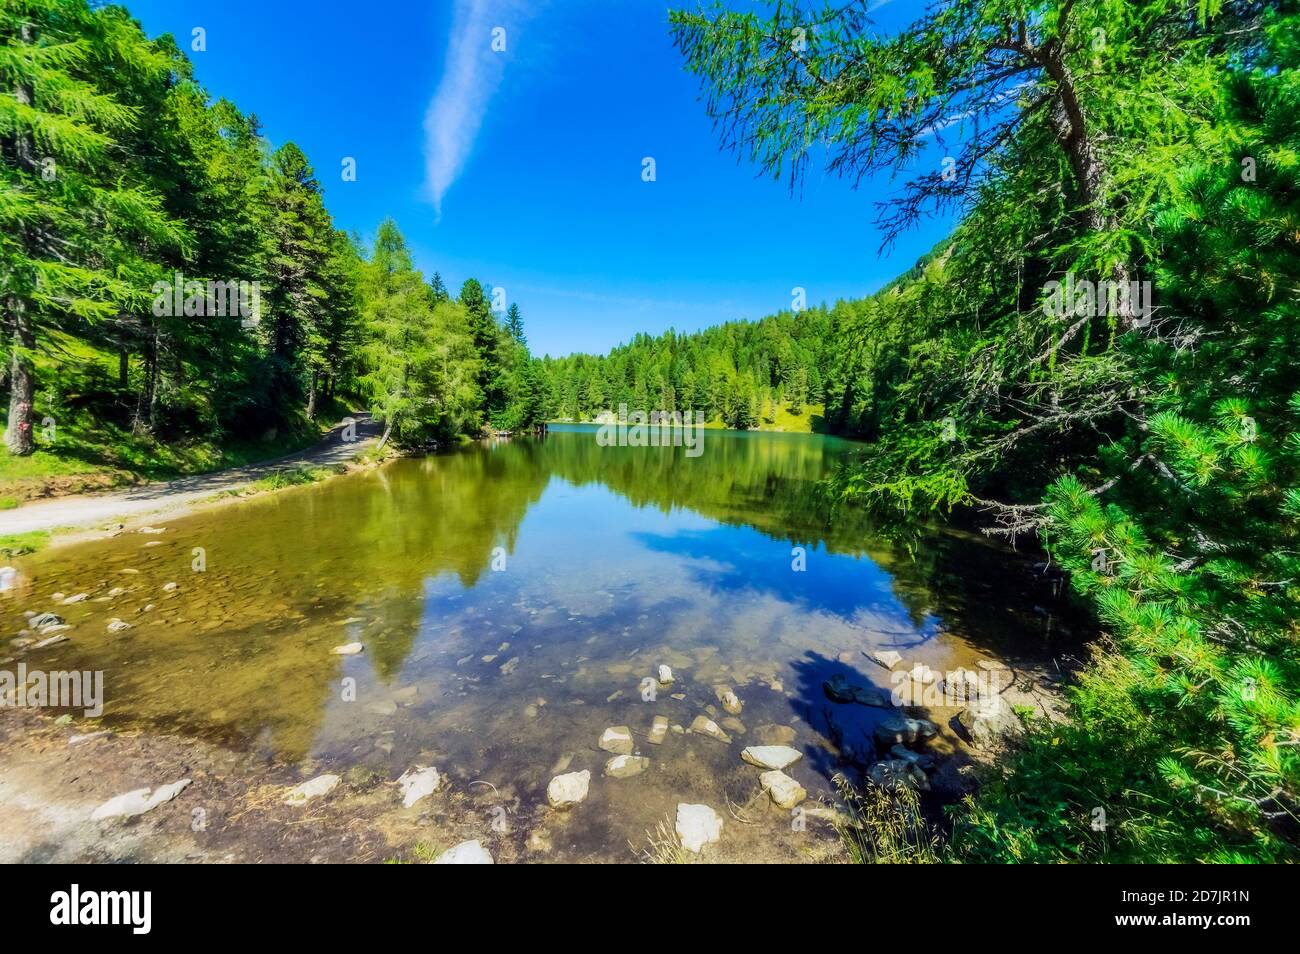 Lake covered with tree in forest at Turracher Hoehe, Gurktal Alps, Austria Stock Photo